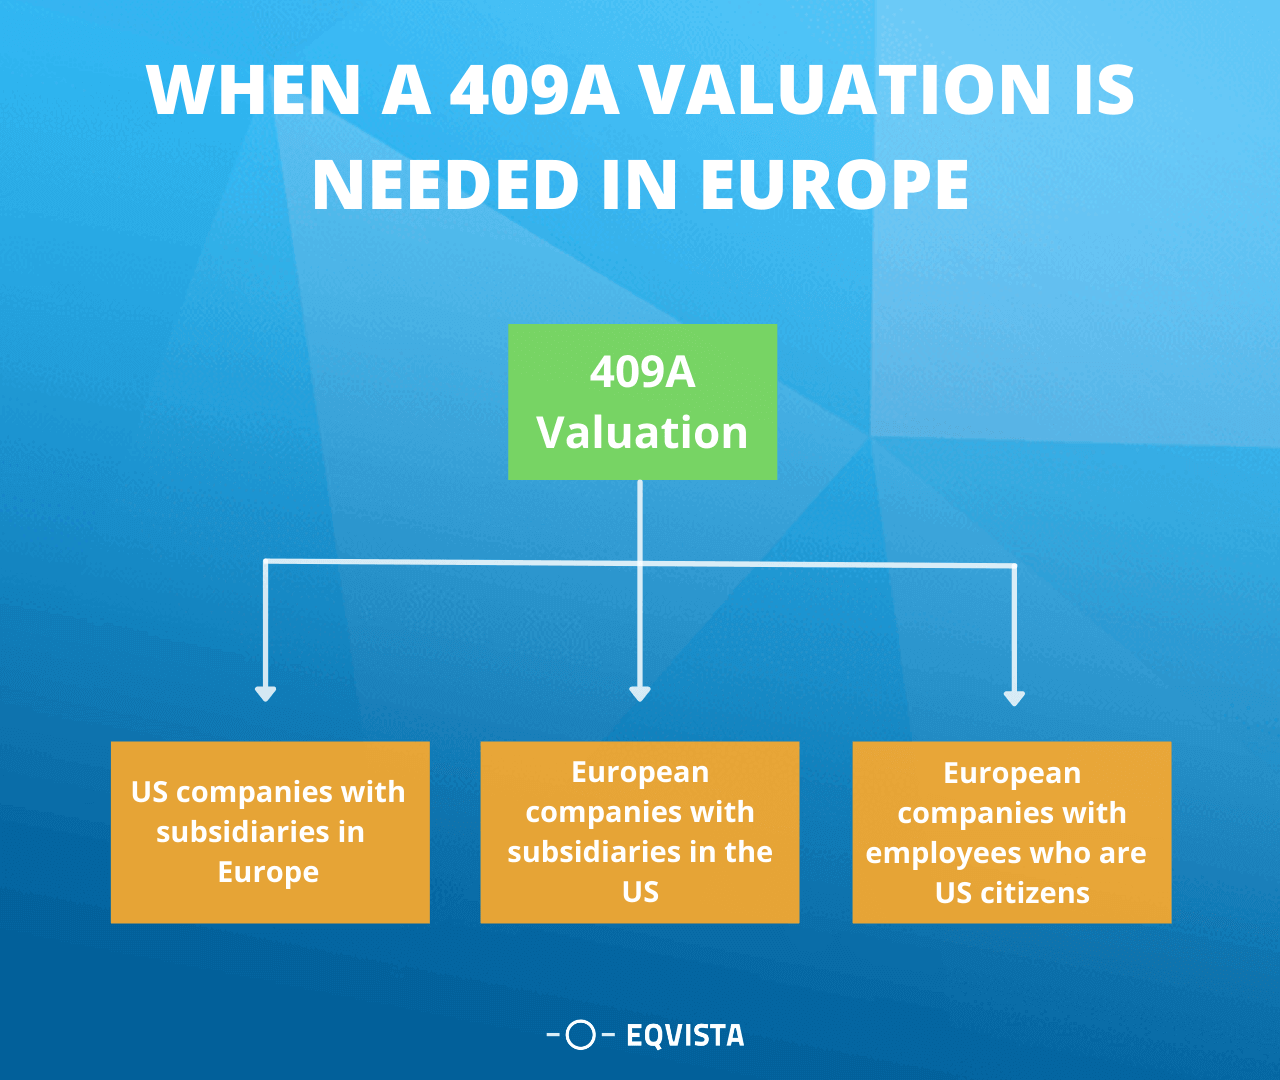   When is a 409a valuation required for a European company?